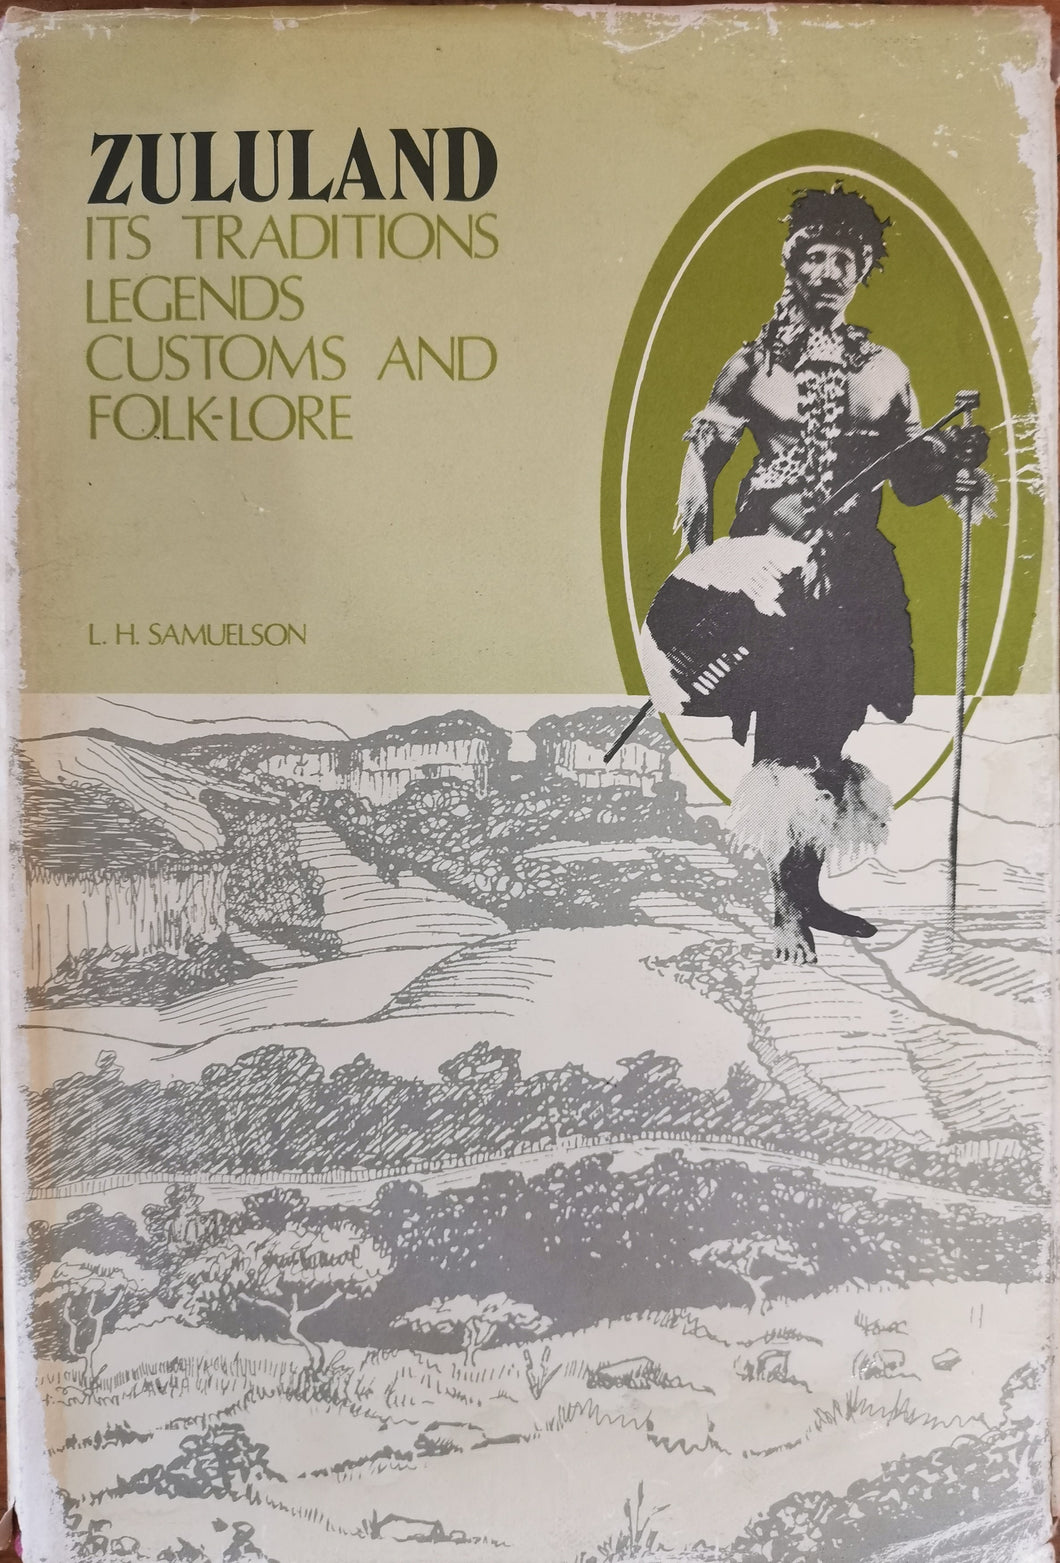 Zululand: Its Traditions, Legends, Customs and Folklore - L.H.Samuelson